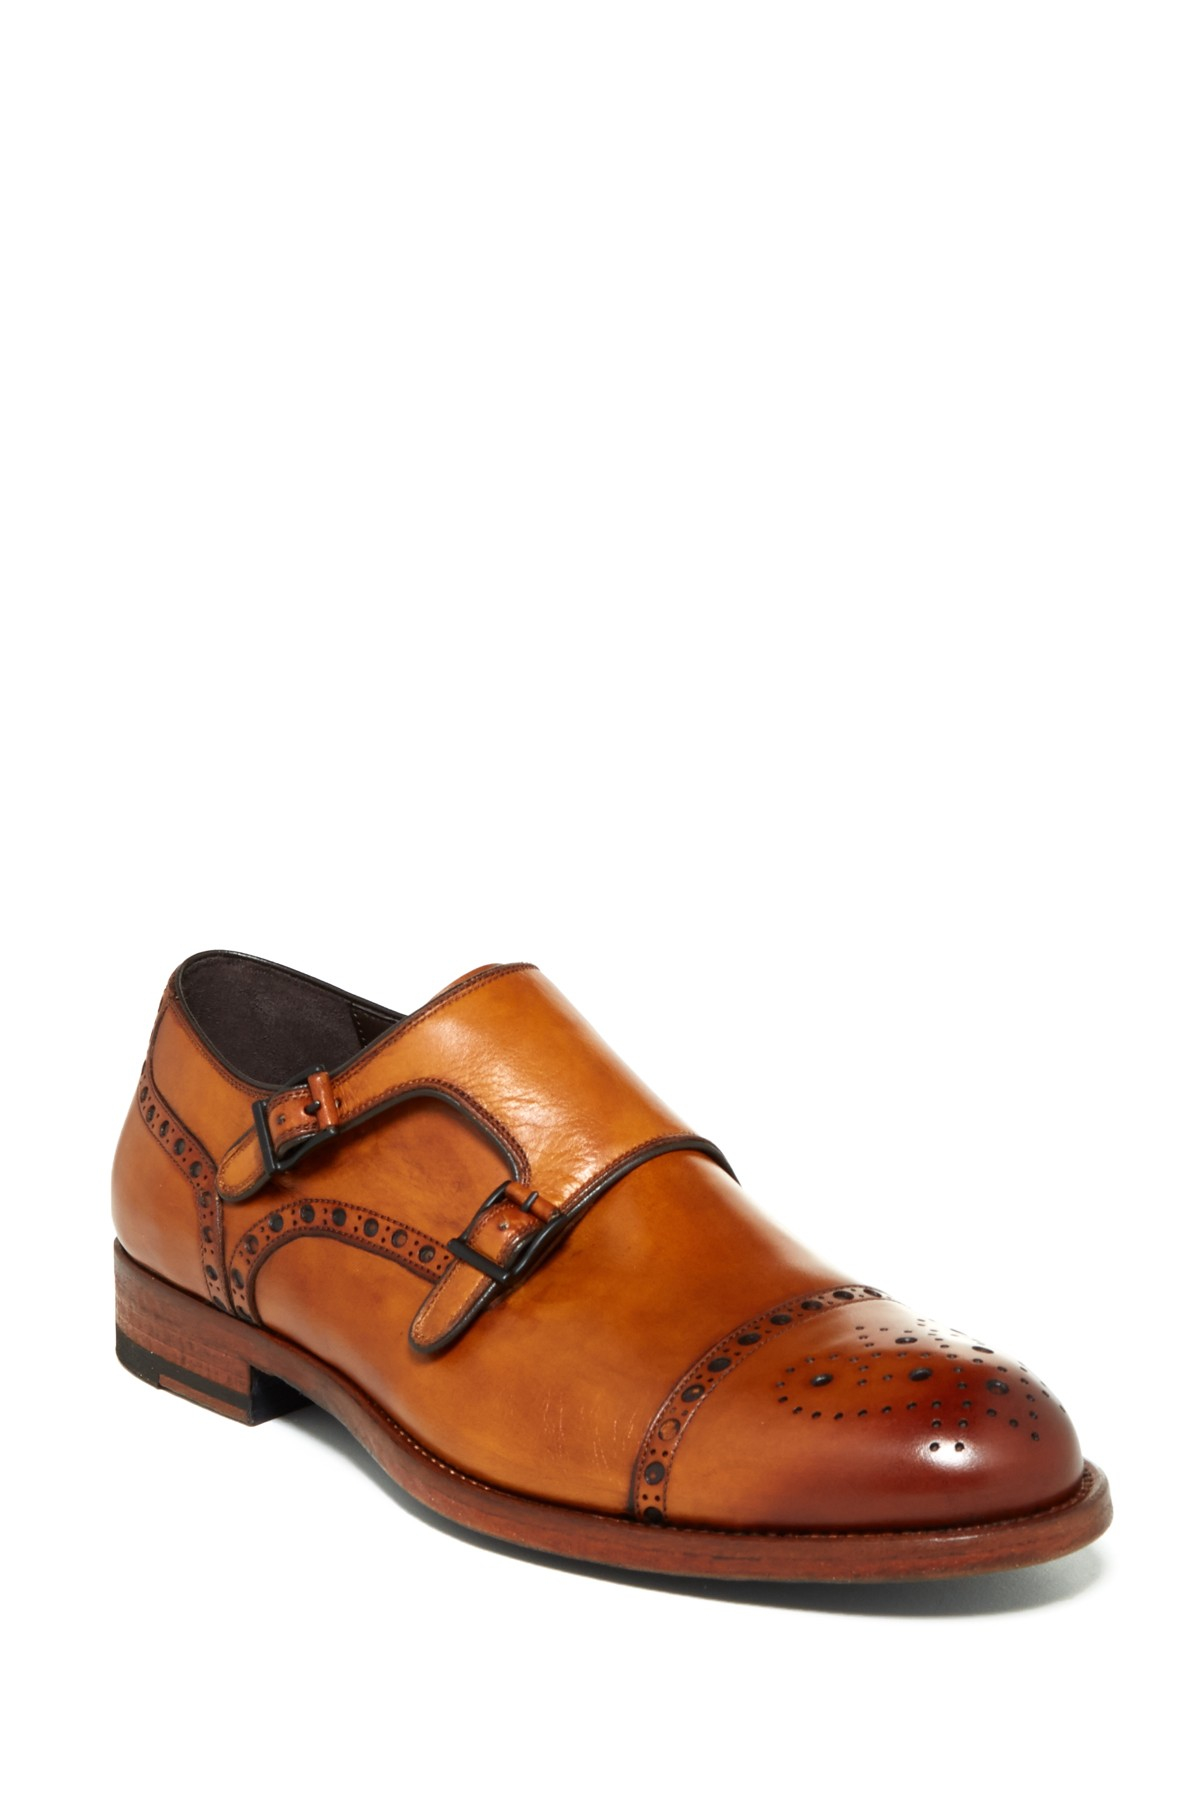 Lyst - Saks Fifth Avenue Tauro Brogue Double Monk Strap Shoe in Brown ...